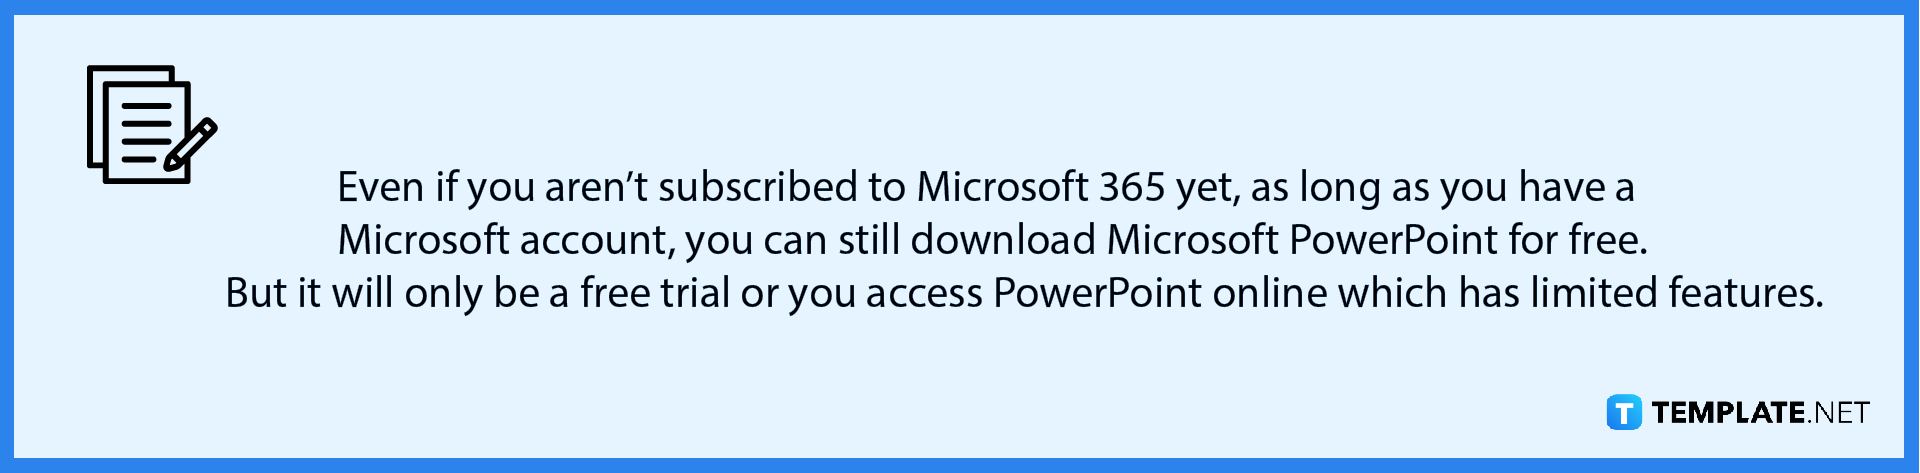 how-to-email-microsoft-powerpoint-note-1